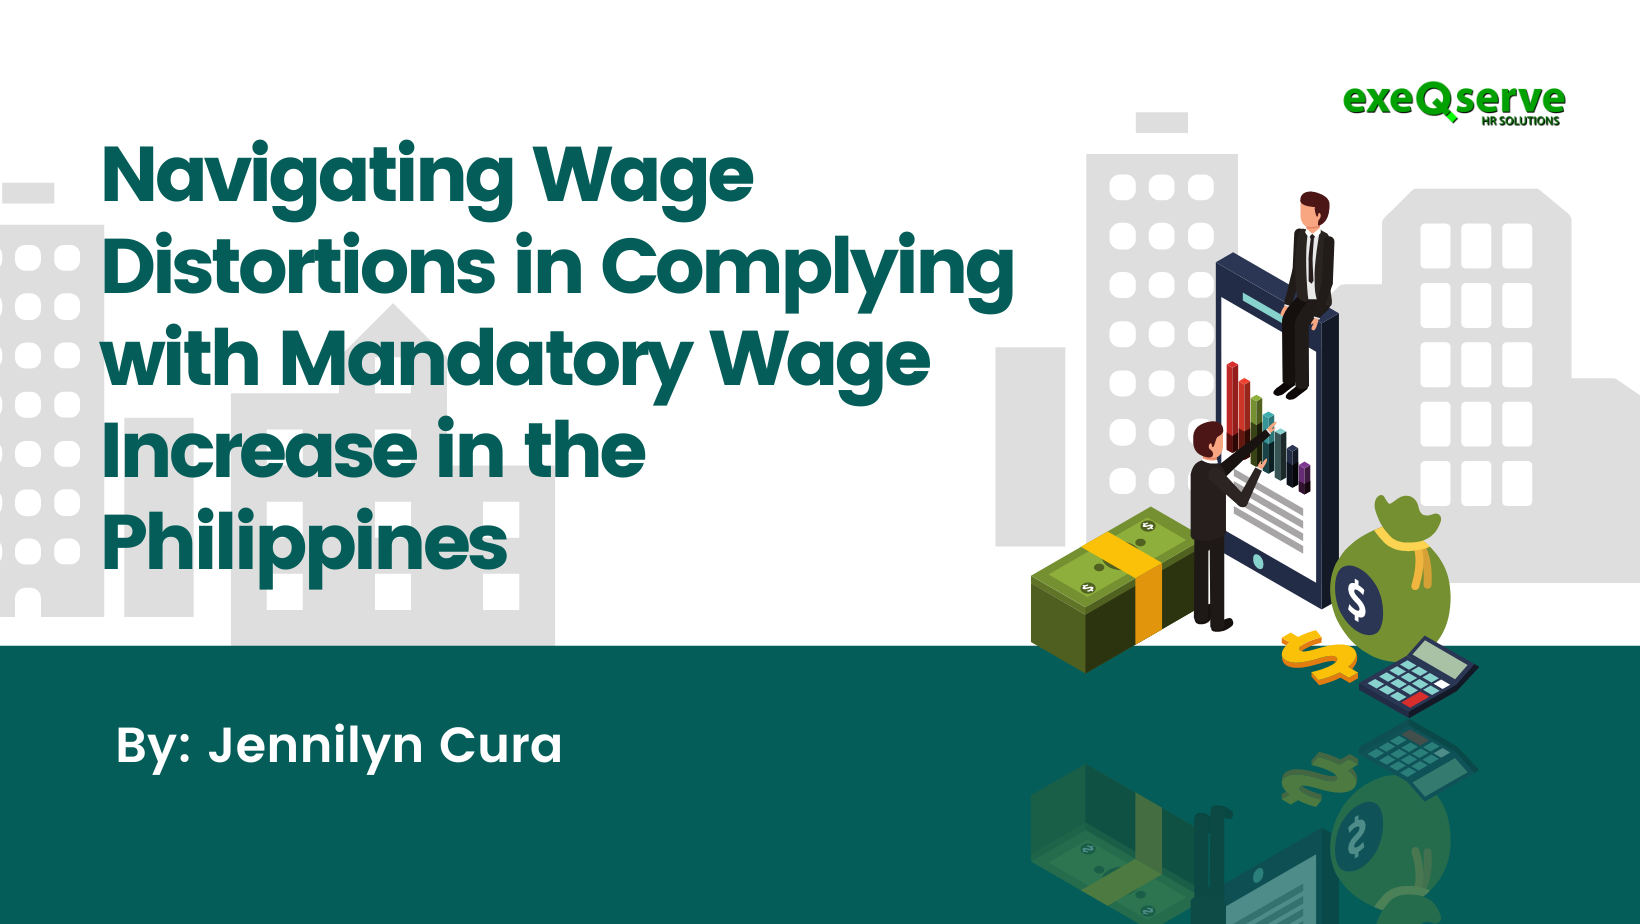 Navigating Wage Distortions in Complying with Mandatory Wage Increase in the Philippines